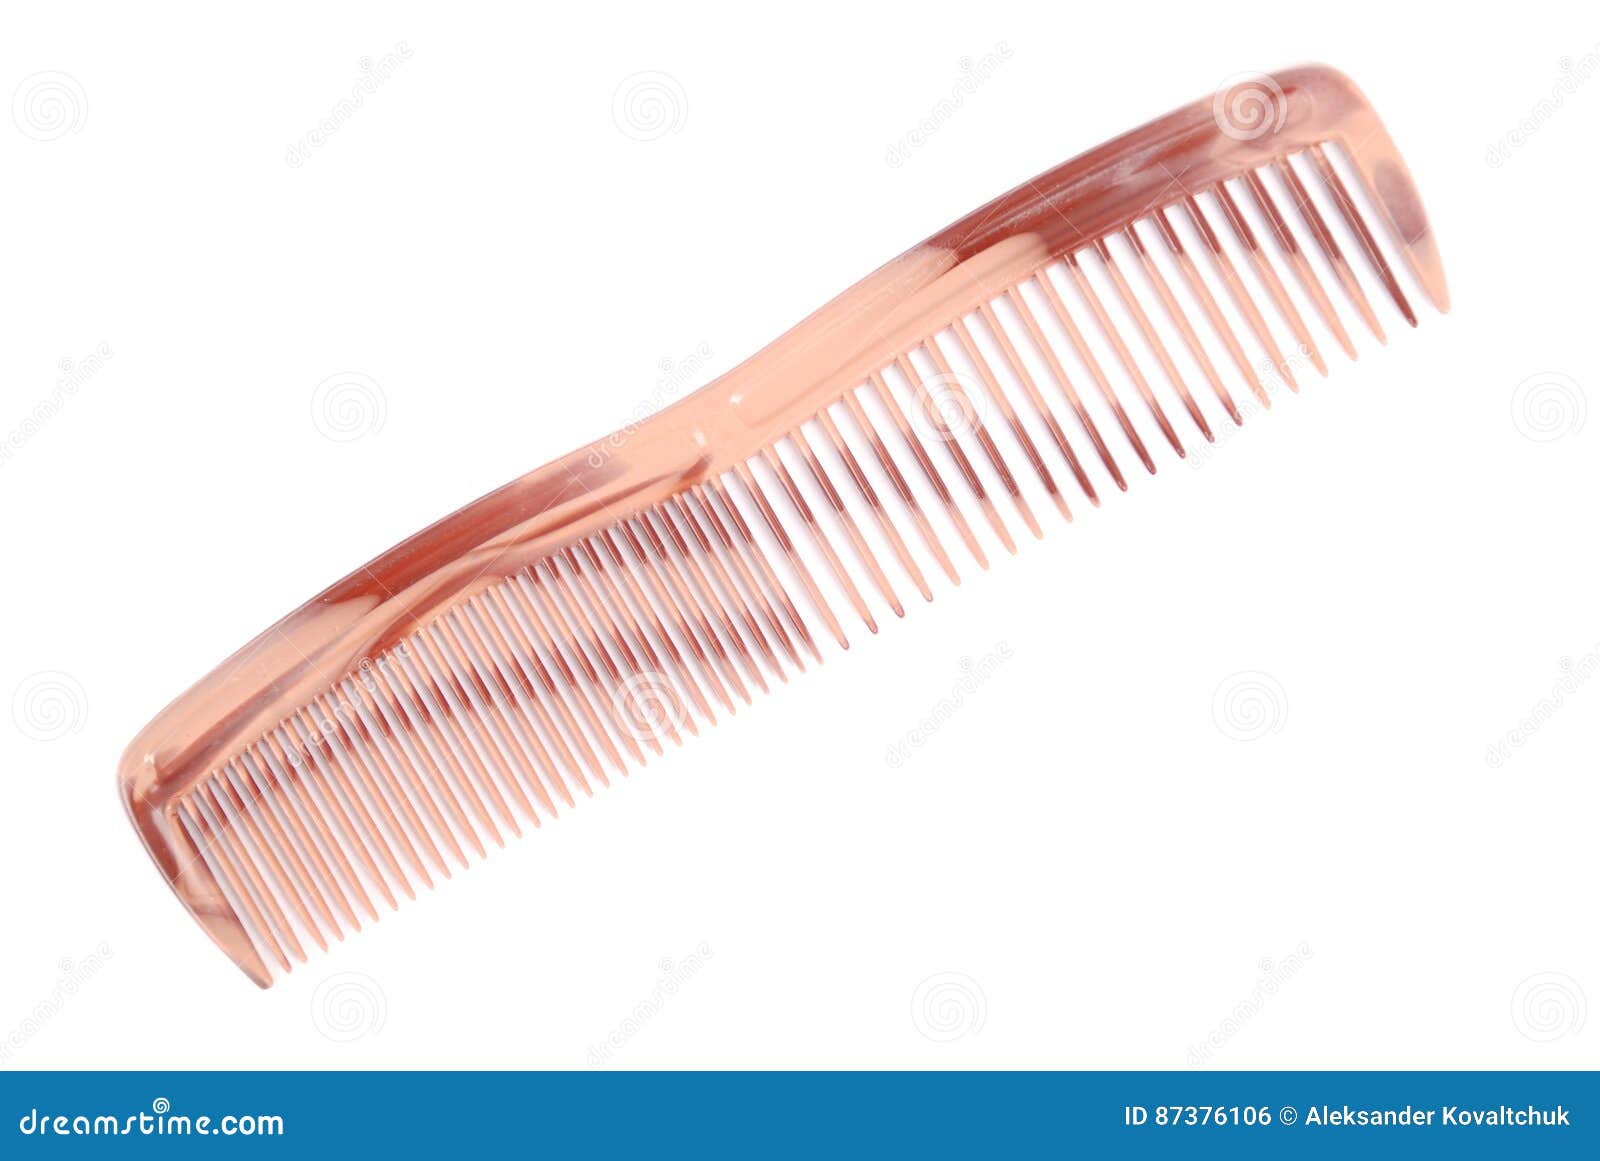 Brown plastic hair comb stock photo. Image of accessory - 87376106